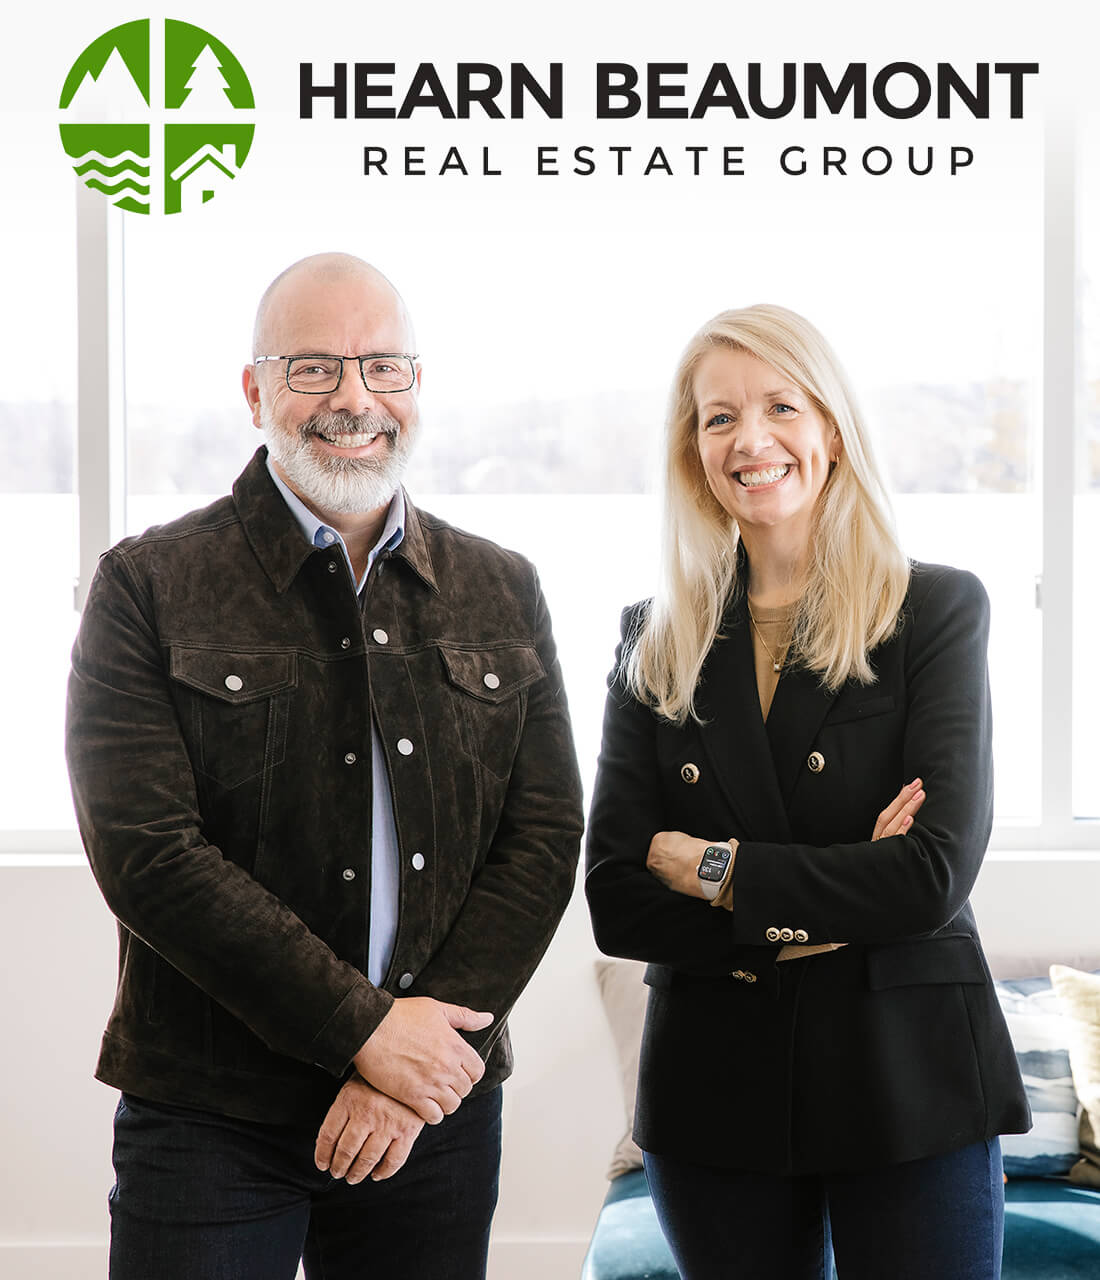 Hearn Beaumont Real Estate Group